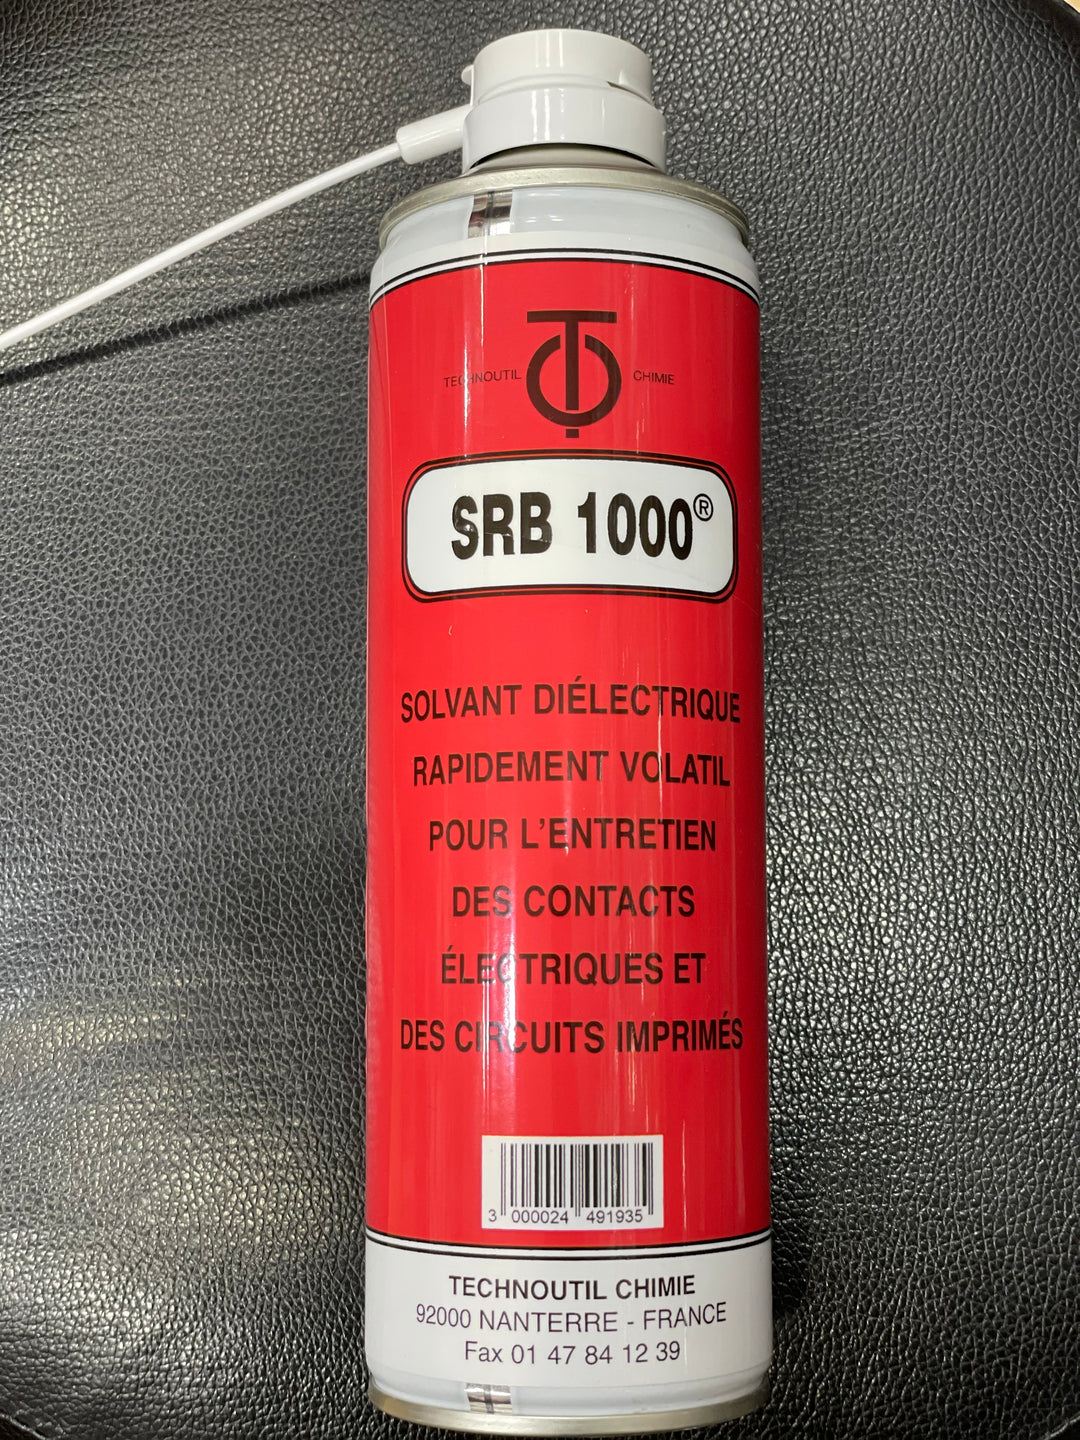 SRB 1000 dielectric Solvent 400ml tools